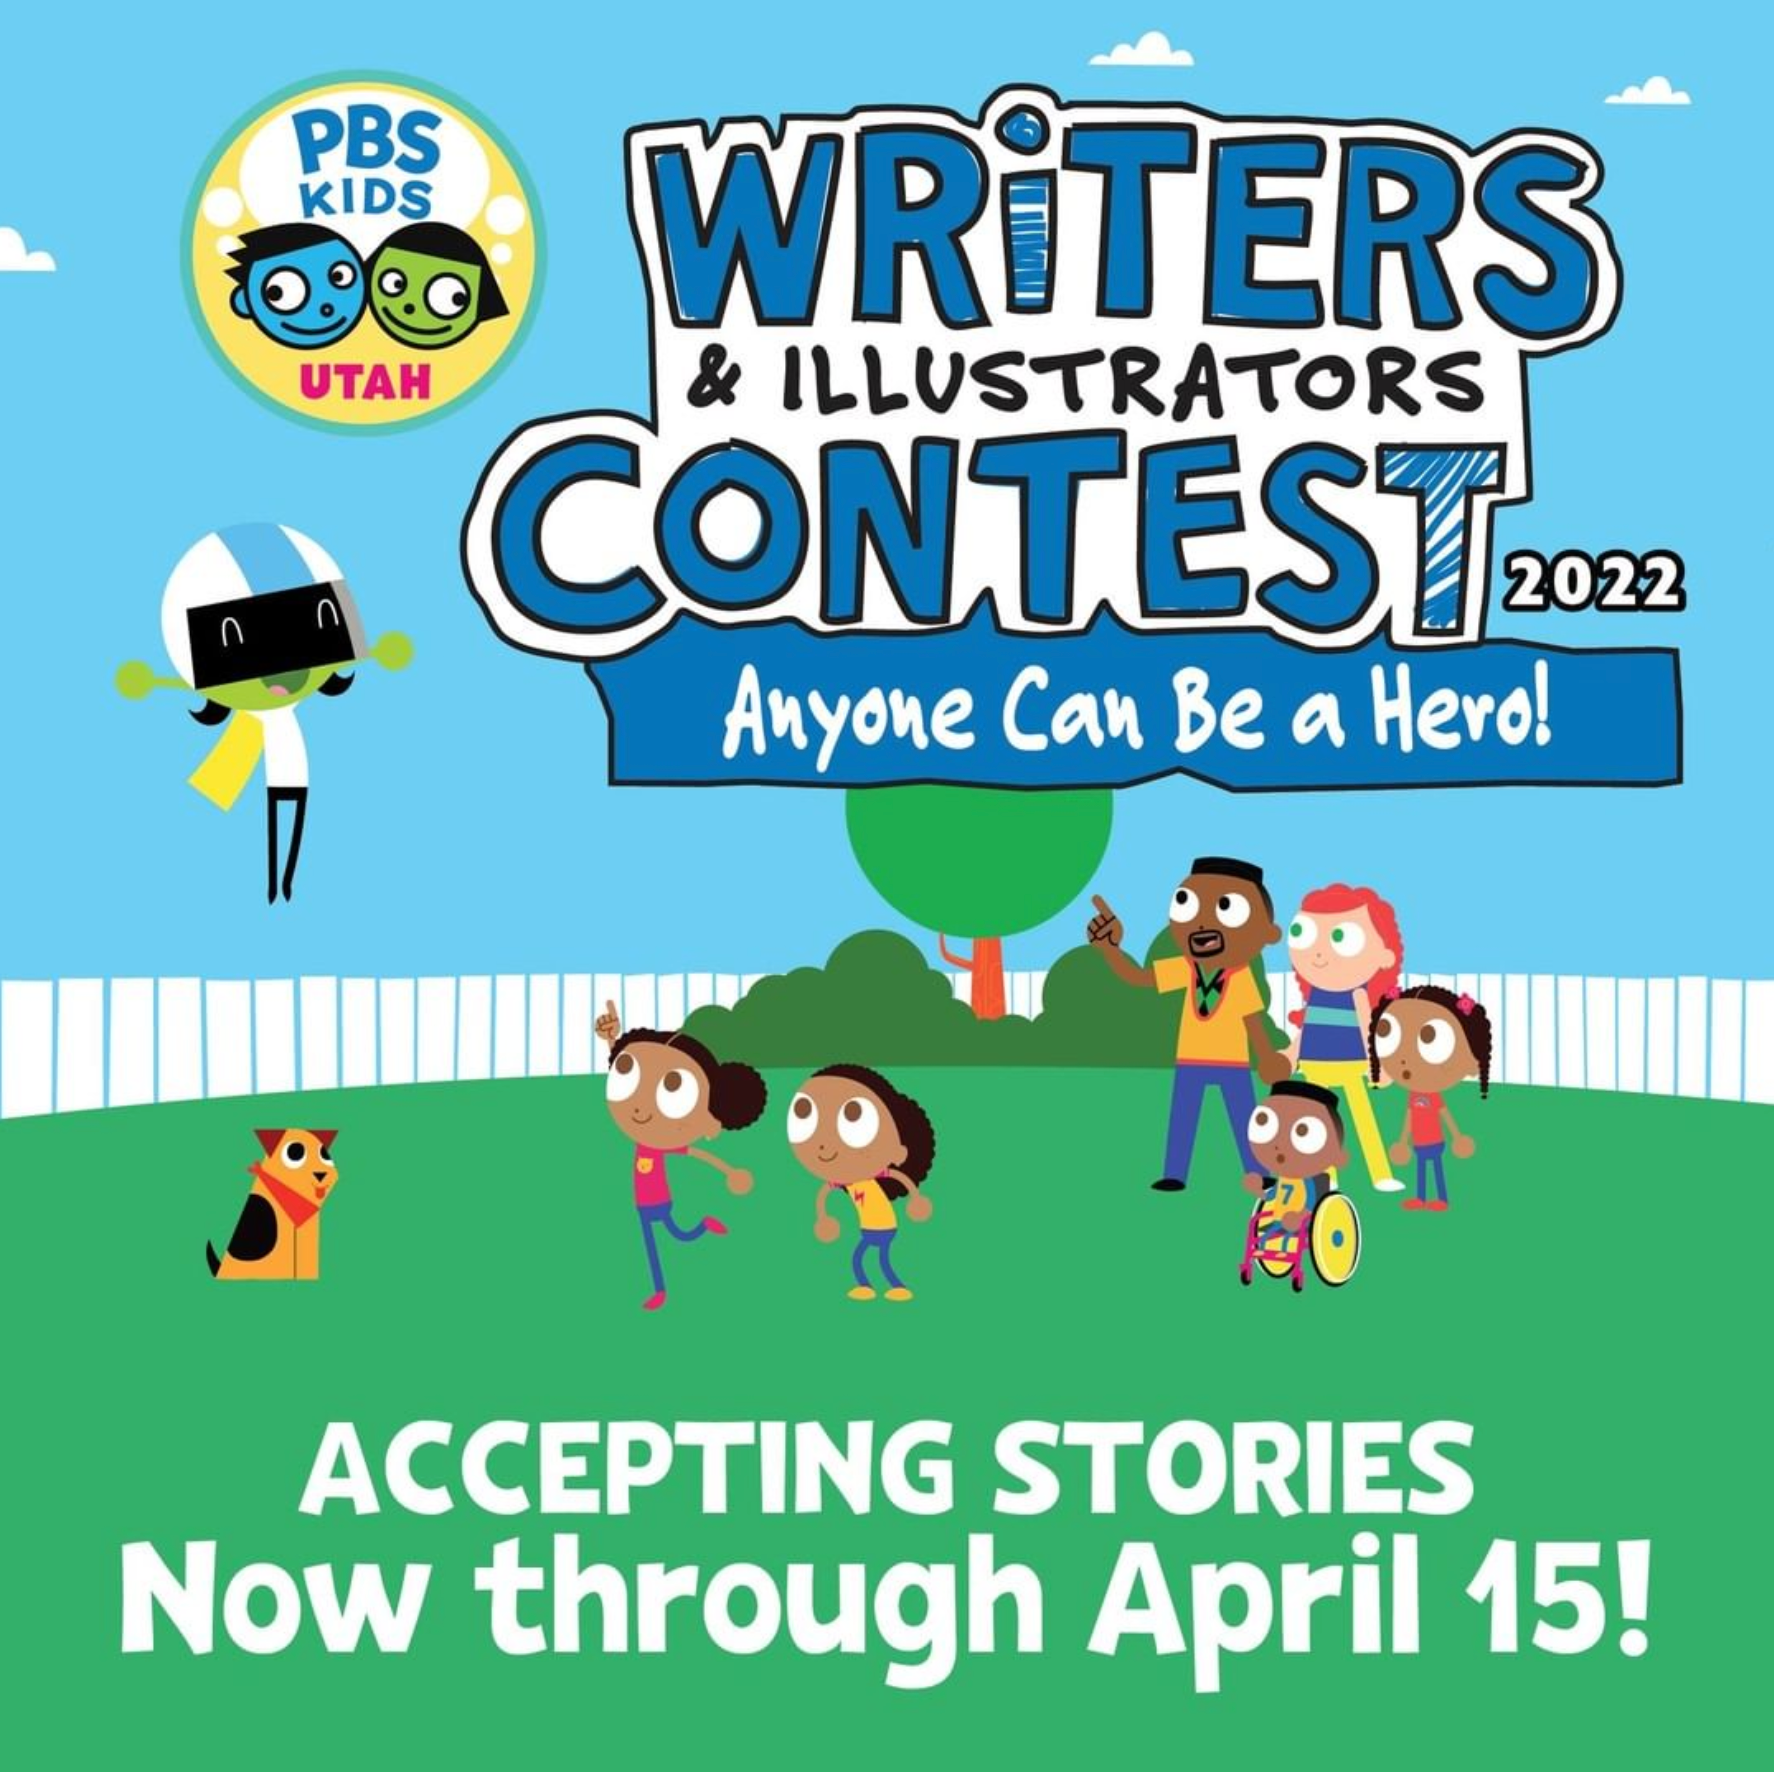 Writers & Illustrators Contest 2021 - Anyone Can Be a Hero!